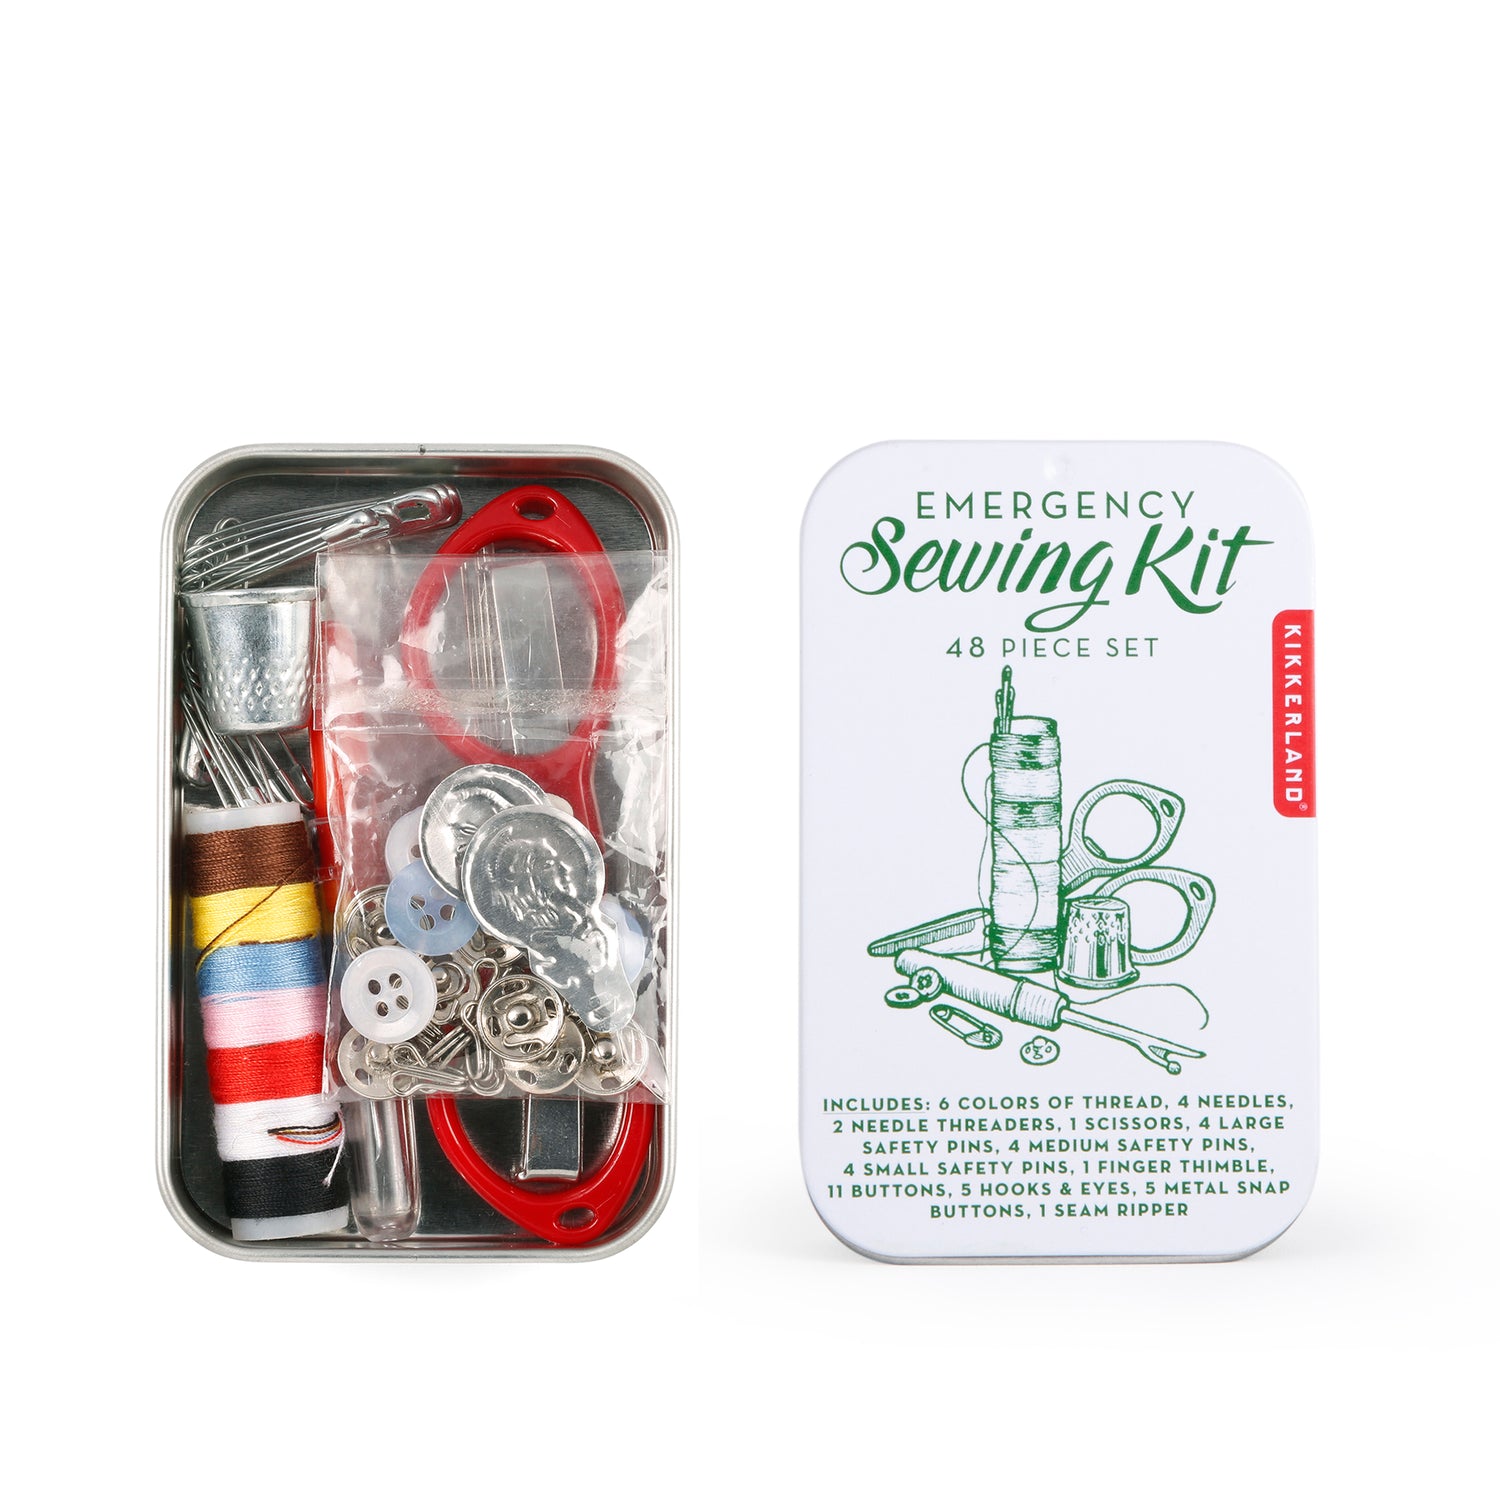 Creating your own emergency sewing kit – SheKnows